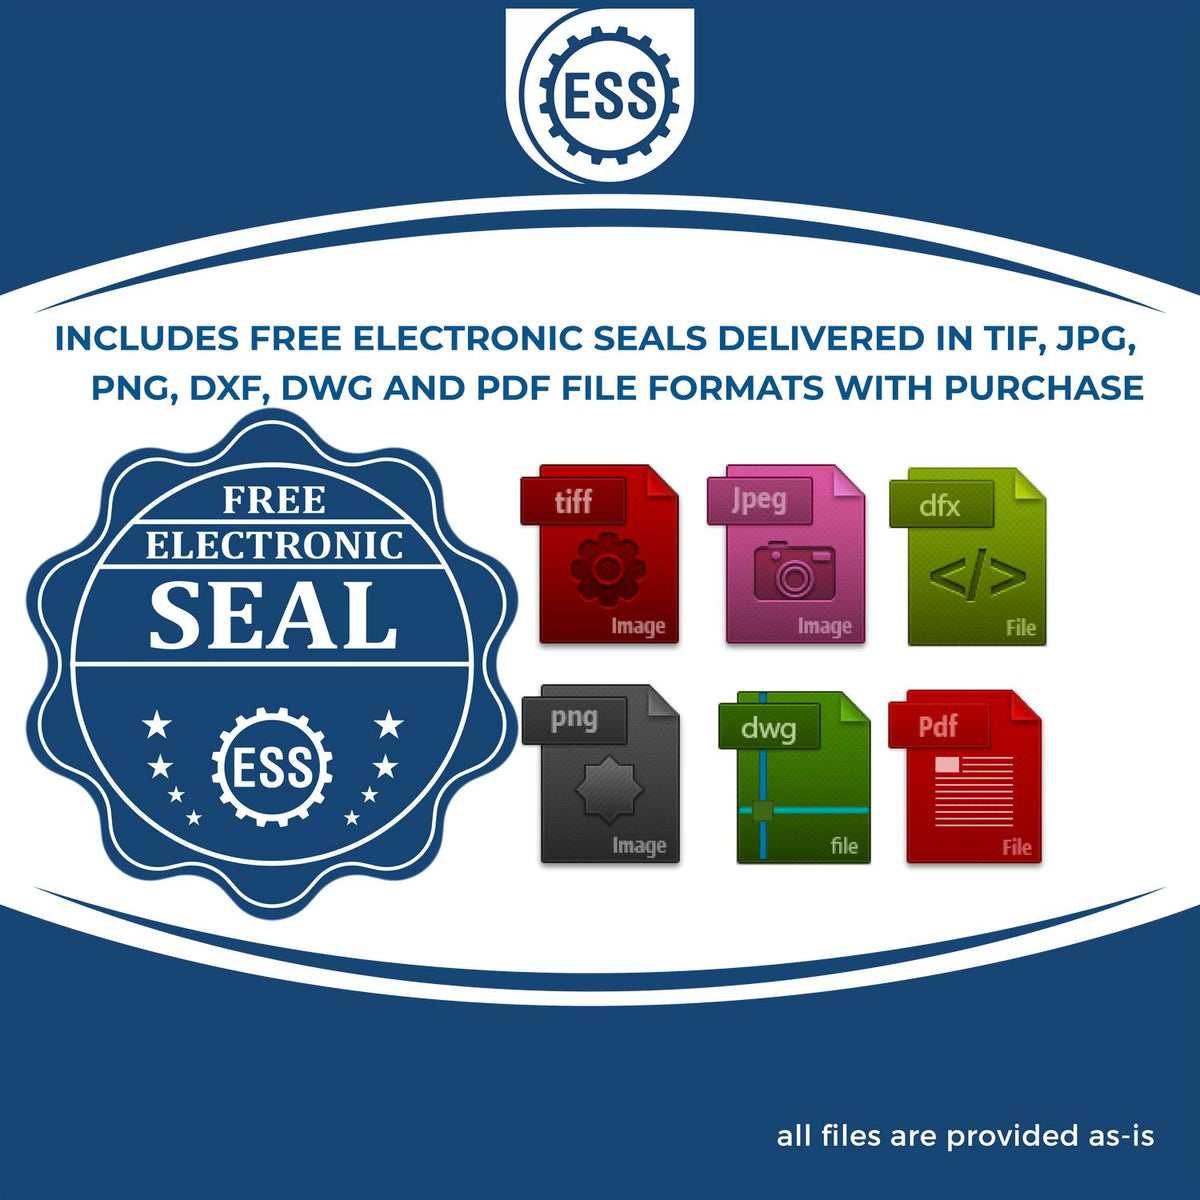 An infographic for the free electronic seal for the Gift Vermont Geologist Seal illustrating the different file type icons such as DXF, DWG, TIF, JPG and PNG.